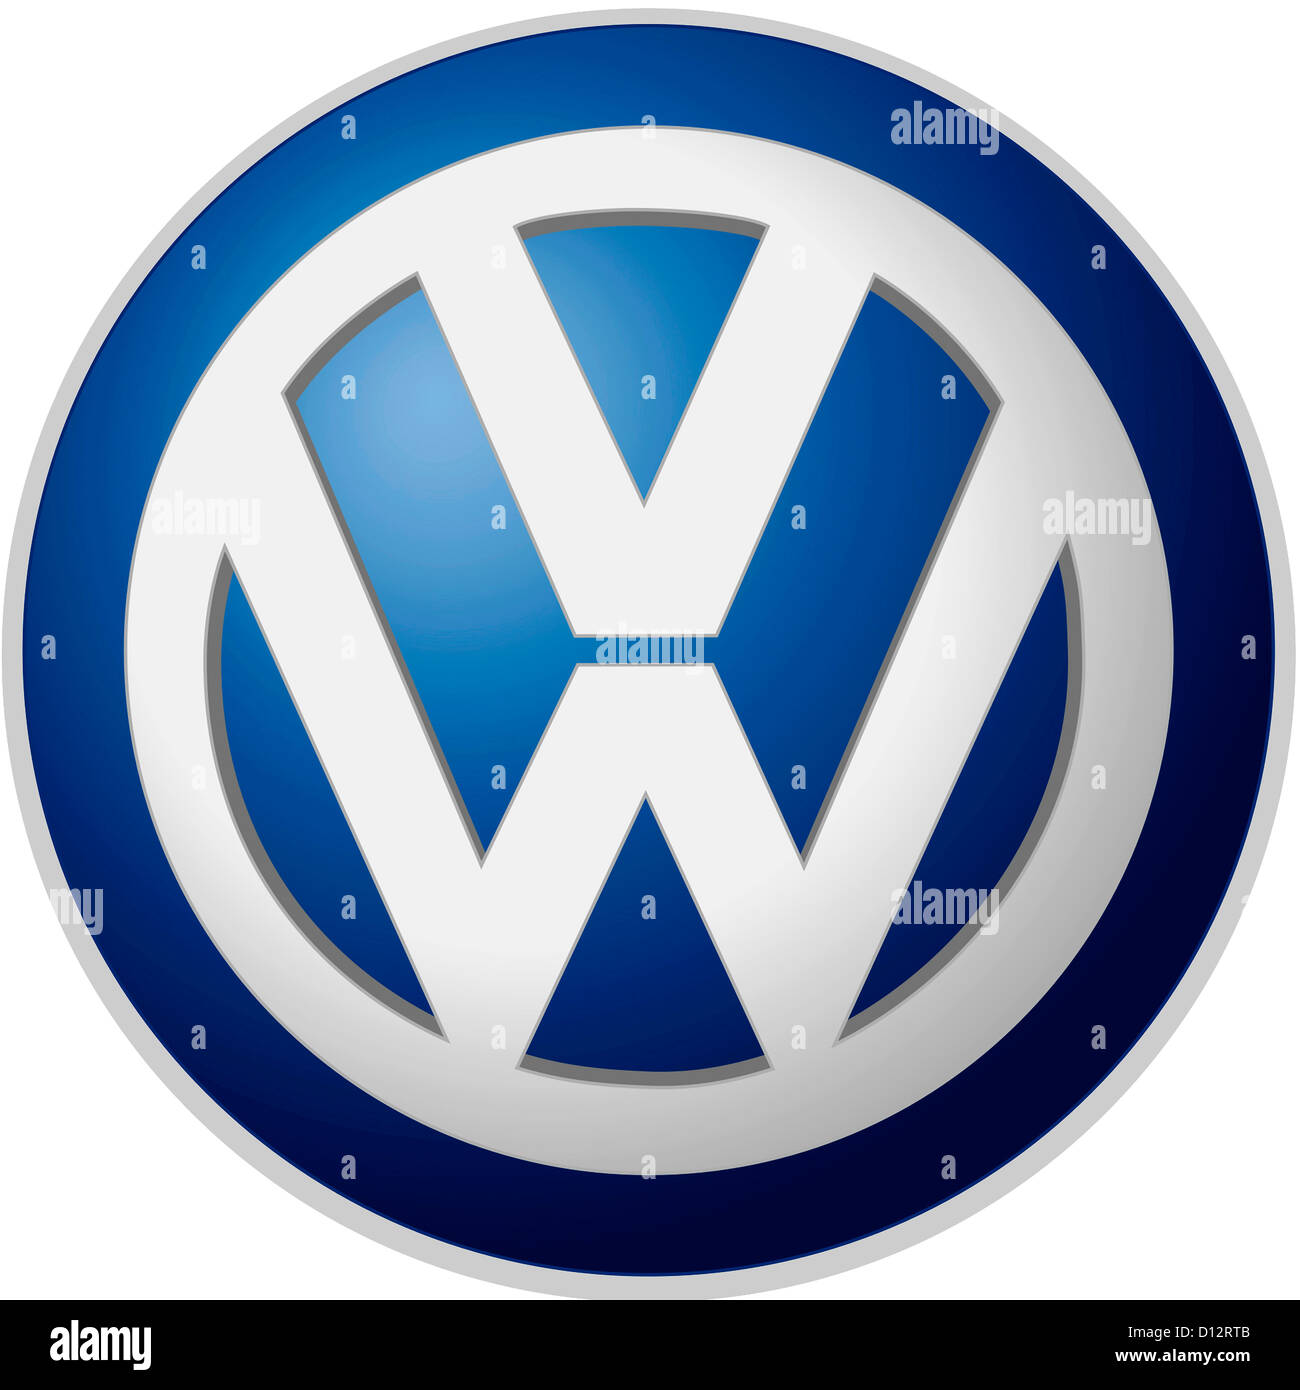 Company logo of the German automotive corporation Volkswagen AG based in Wolfsburg. Stock Photo